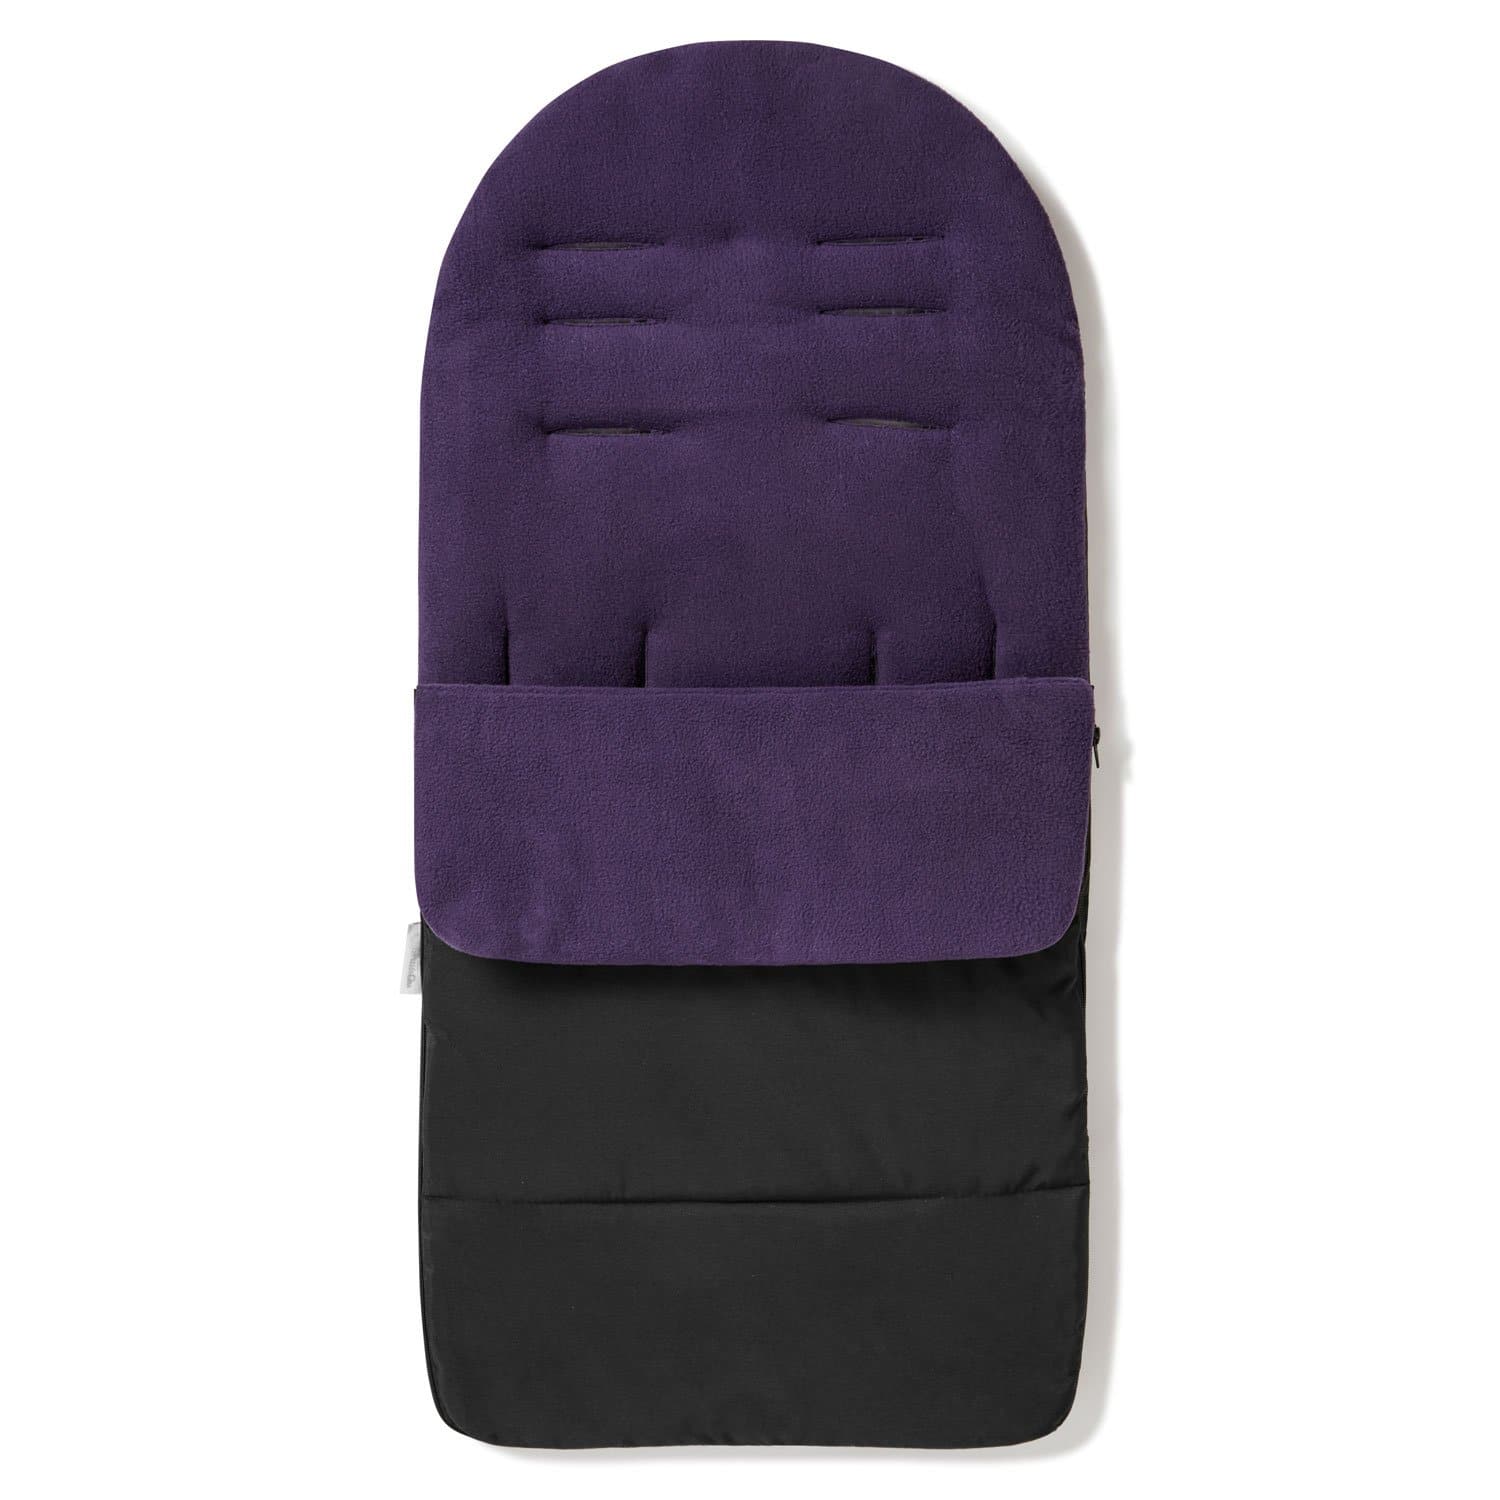 Premium Footmuff / Cosy Toes Compatible with Maclaren - Plum Purple / Fits All Models | For Your Little One